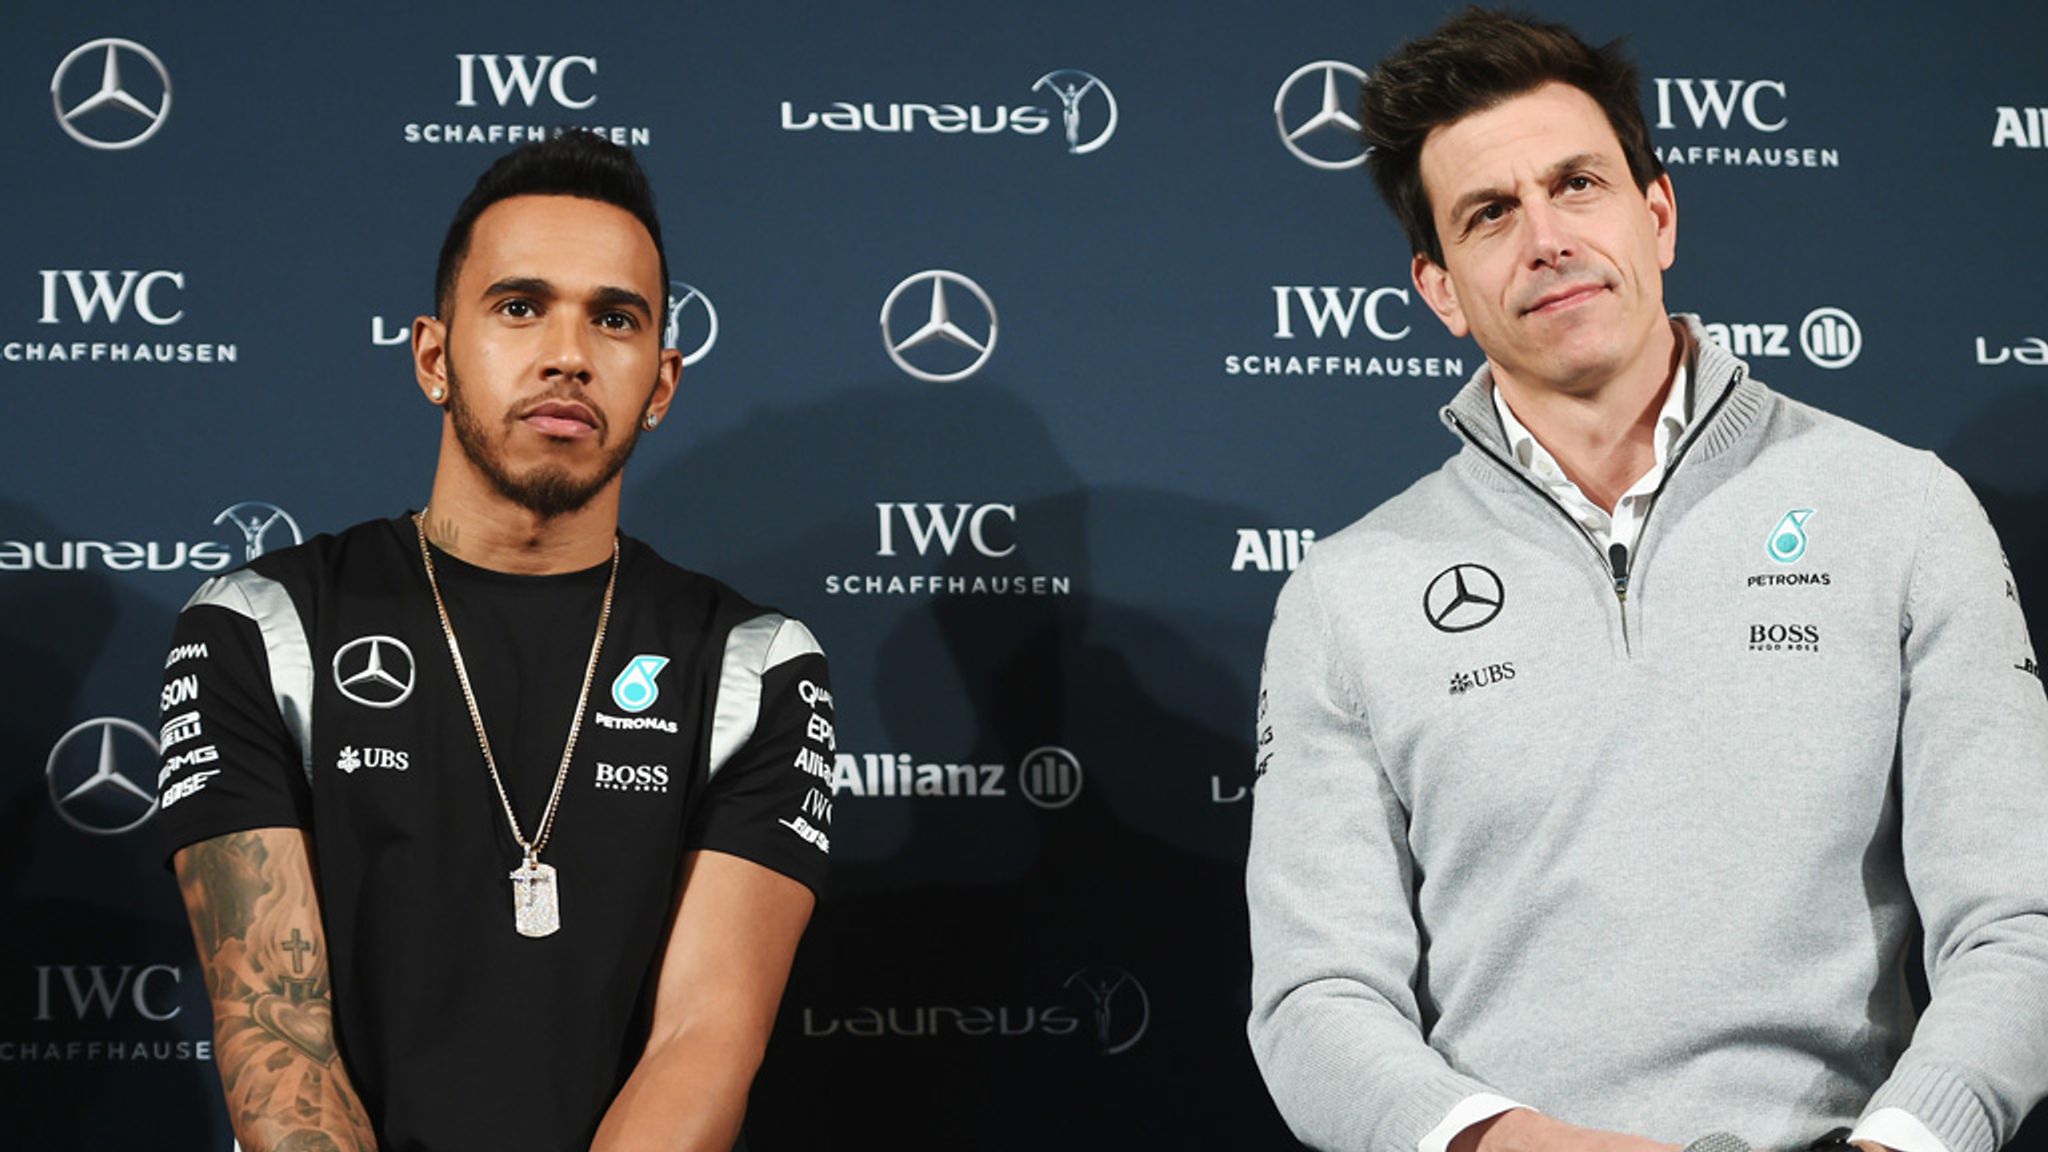 Lewis Hamilton describes animated exchange with Wolff as internal